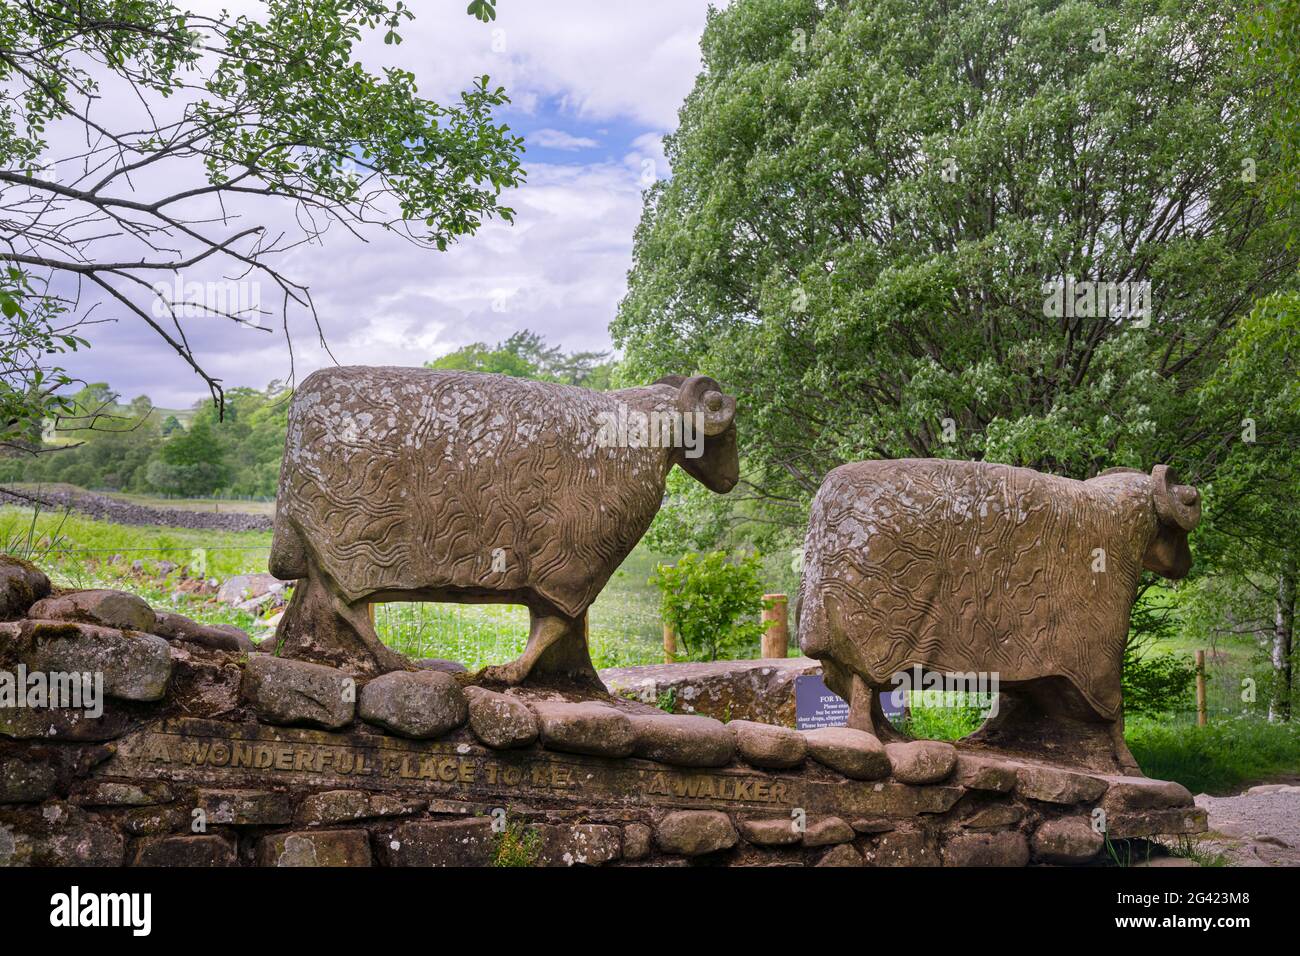 BOWLEES, ENGLAND - JUNE 9th, 2021: Sheep, a limestone statue of two sheep celebrating walking in Upper Teesdale, County Durham, England Stock Photo